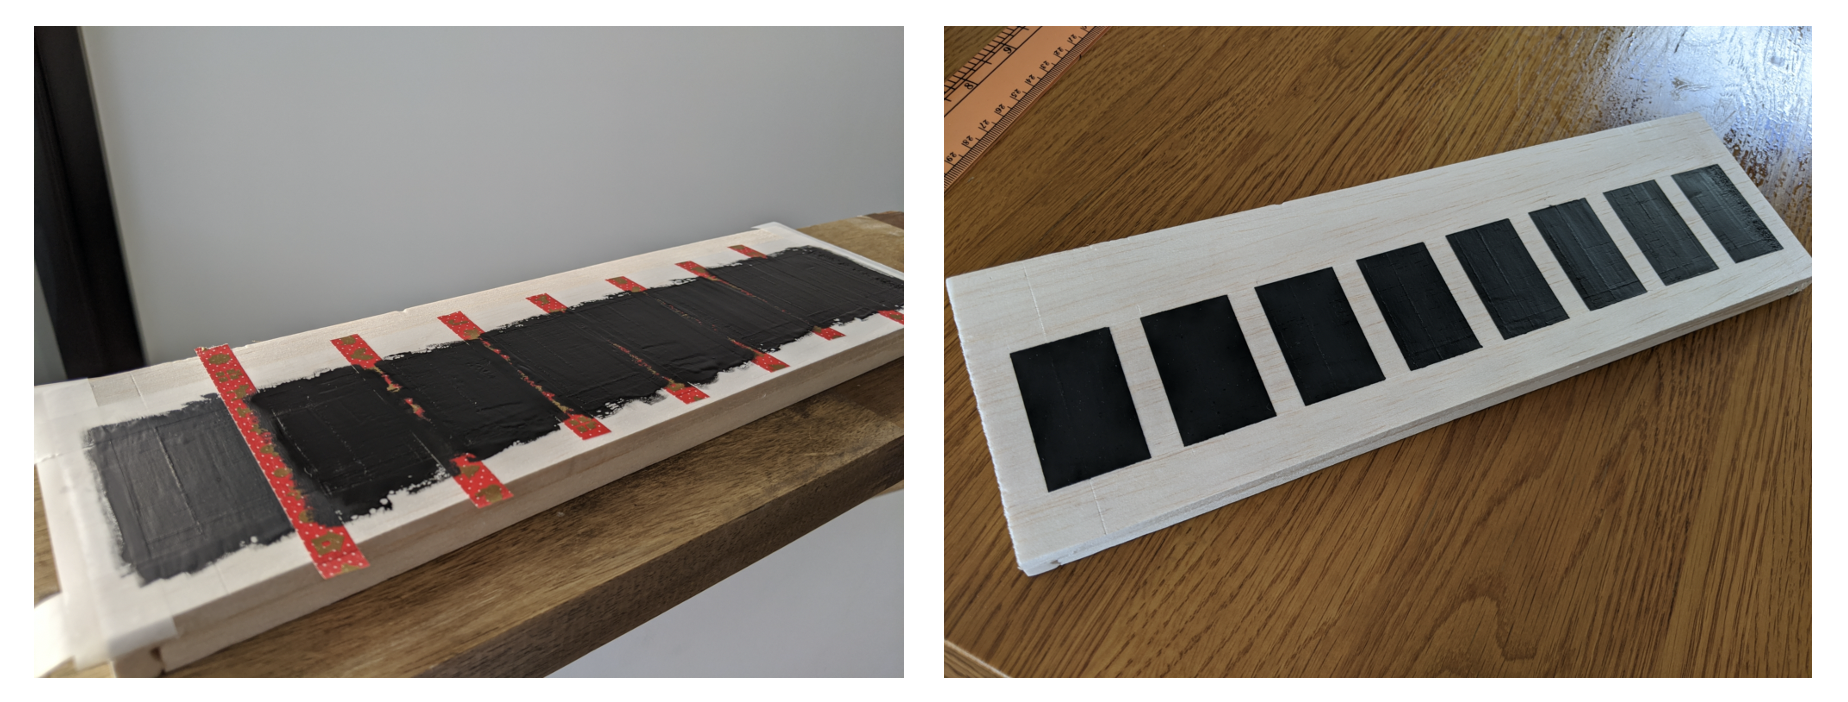 painting the conductive paint on the keyboard